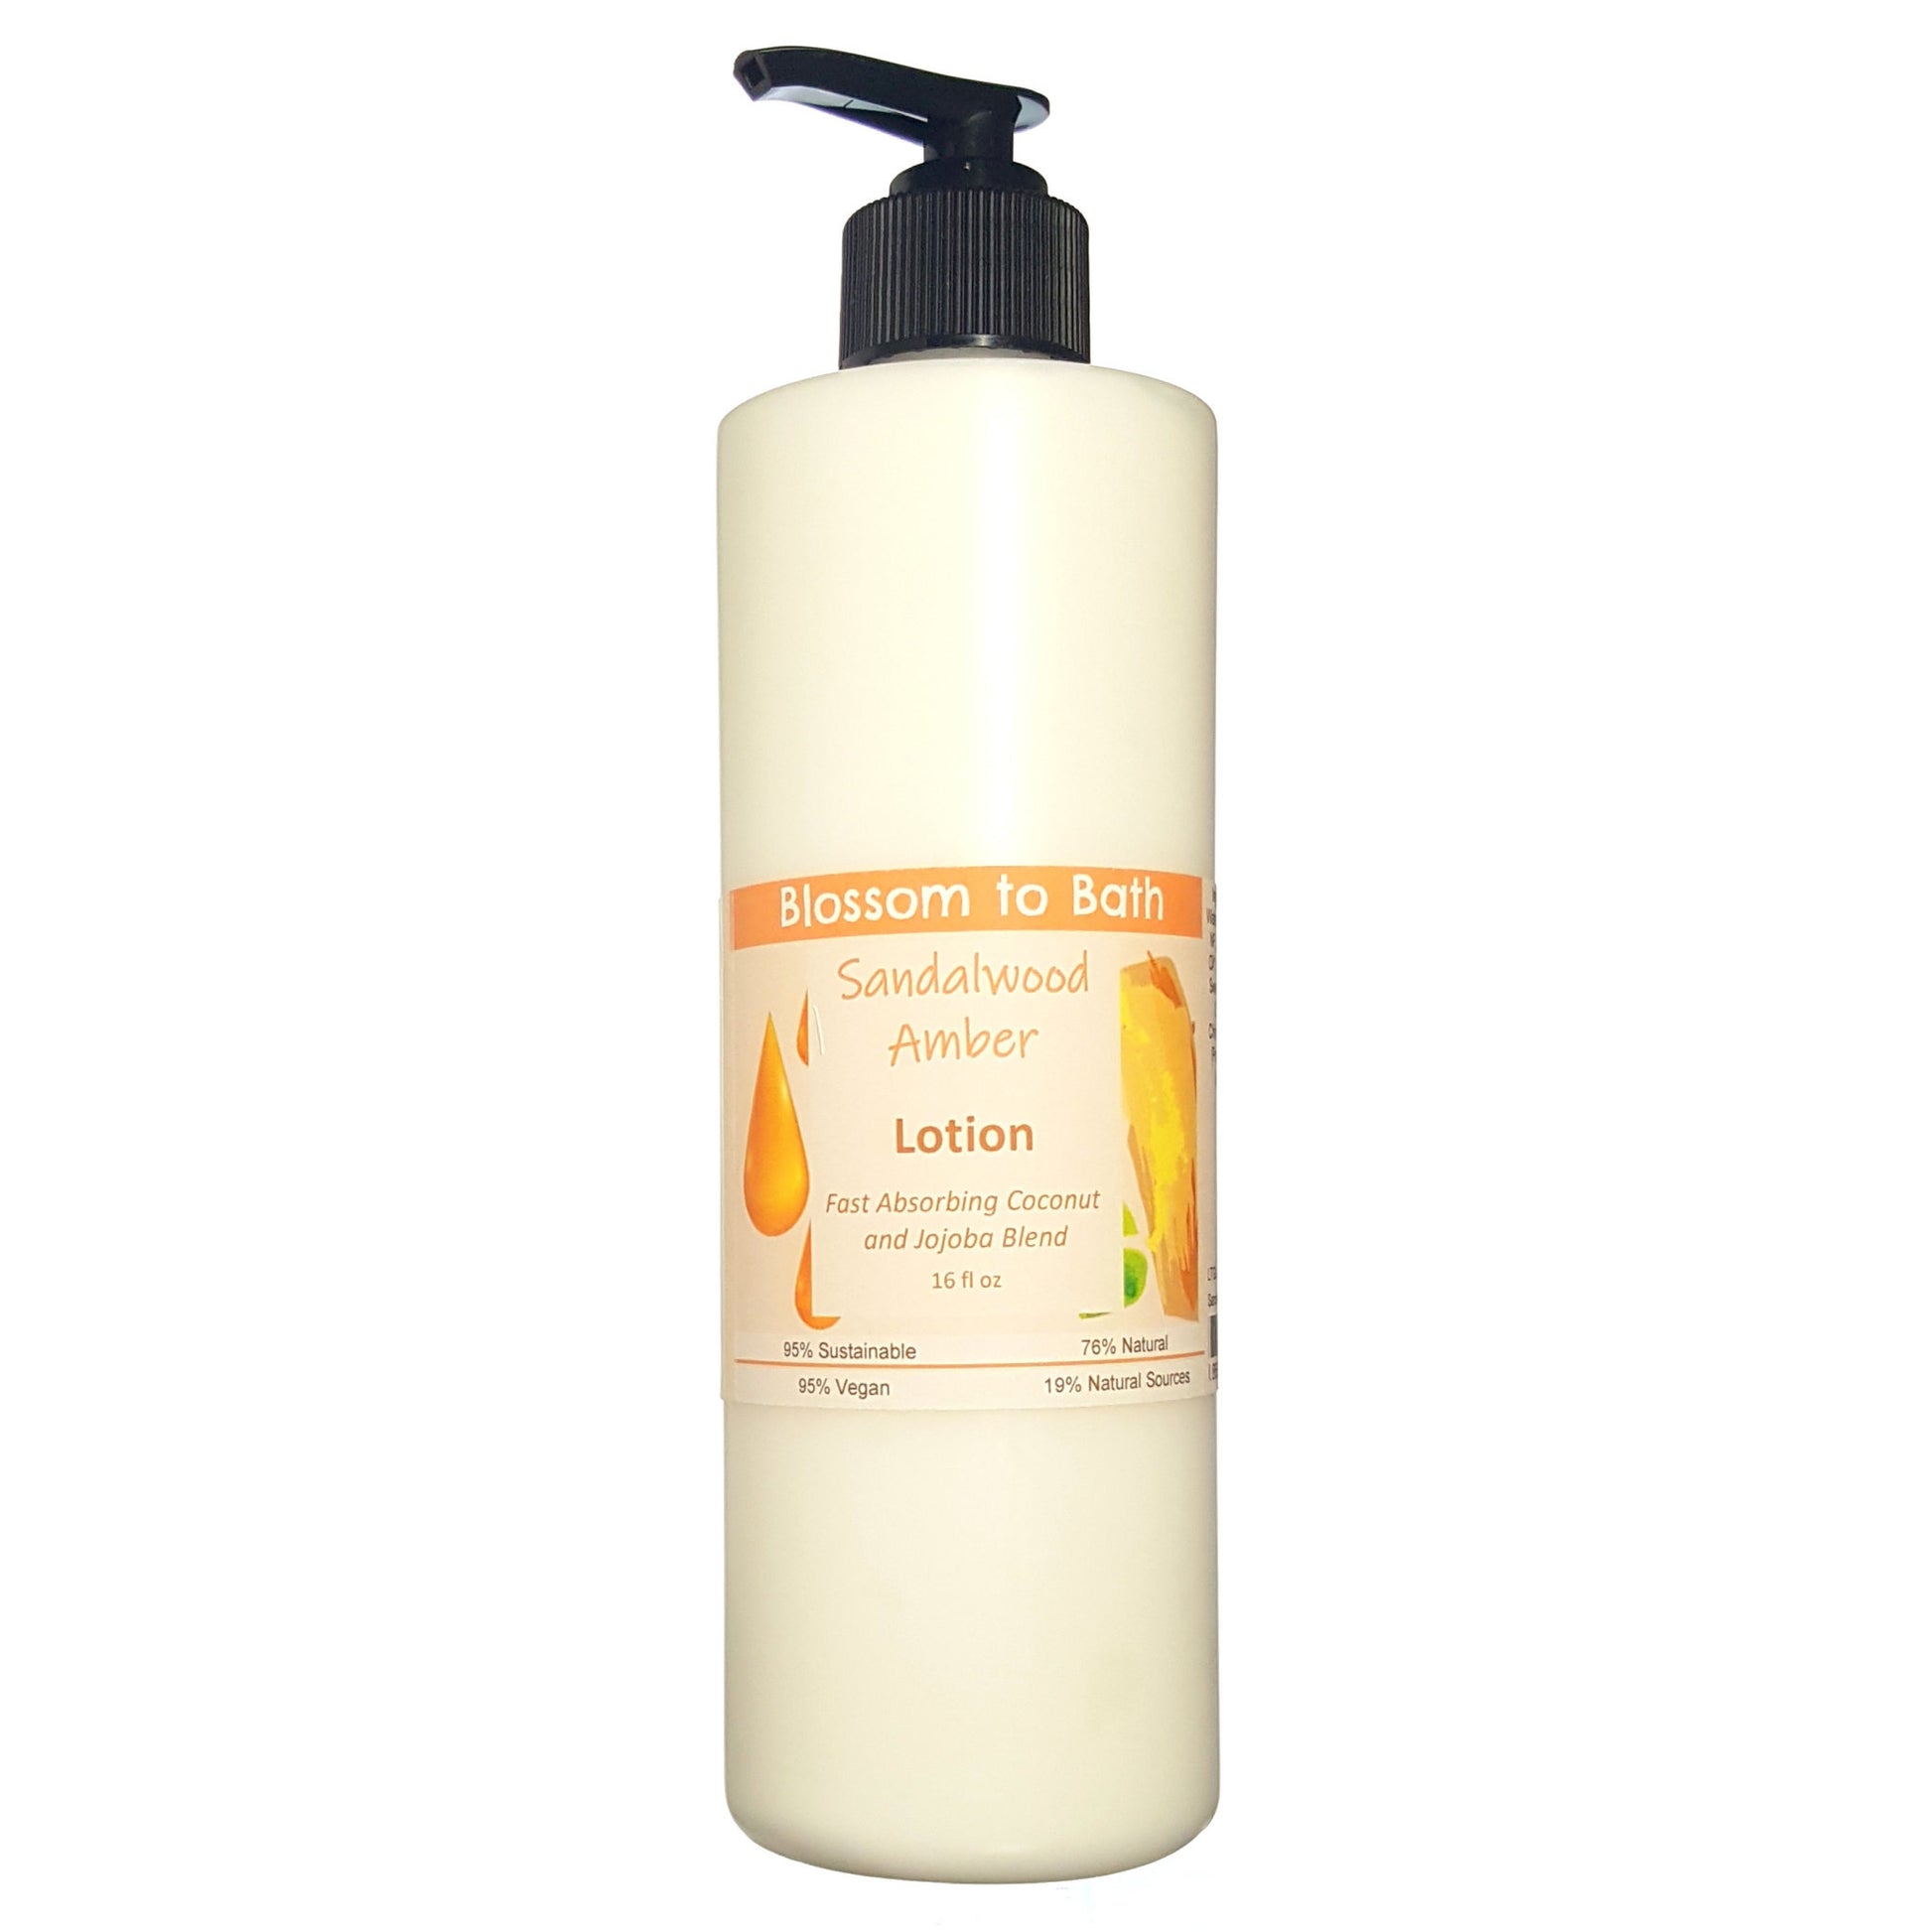 Buy Blossom to Bath Sandalwood Amber Lotion from Flowersong Soap Studio.  Daily moisture luxury that soaks in quickly made with organic oils and butters that soften and smooth the skin  An irresistible combination of warm sandalwood and spice.